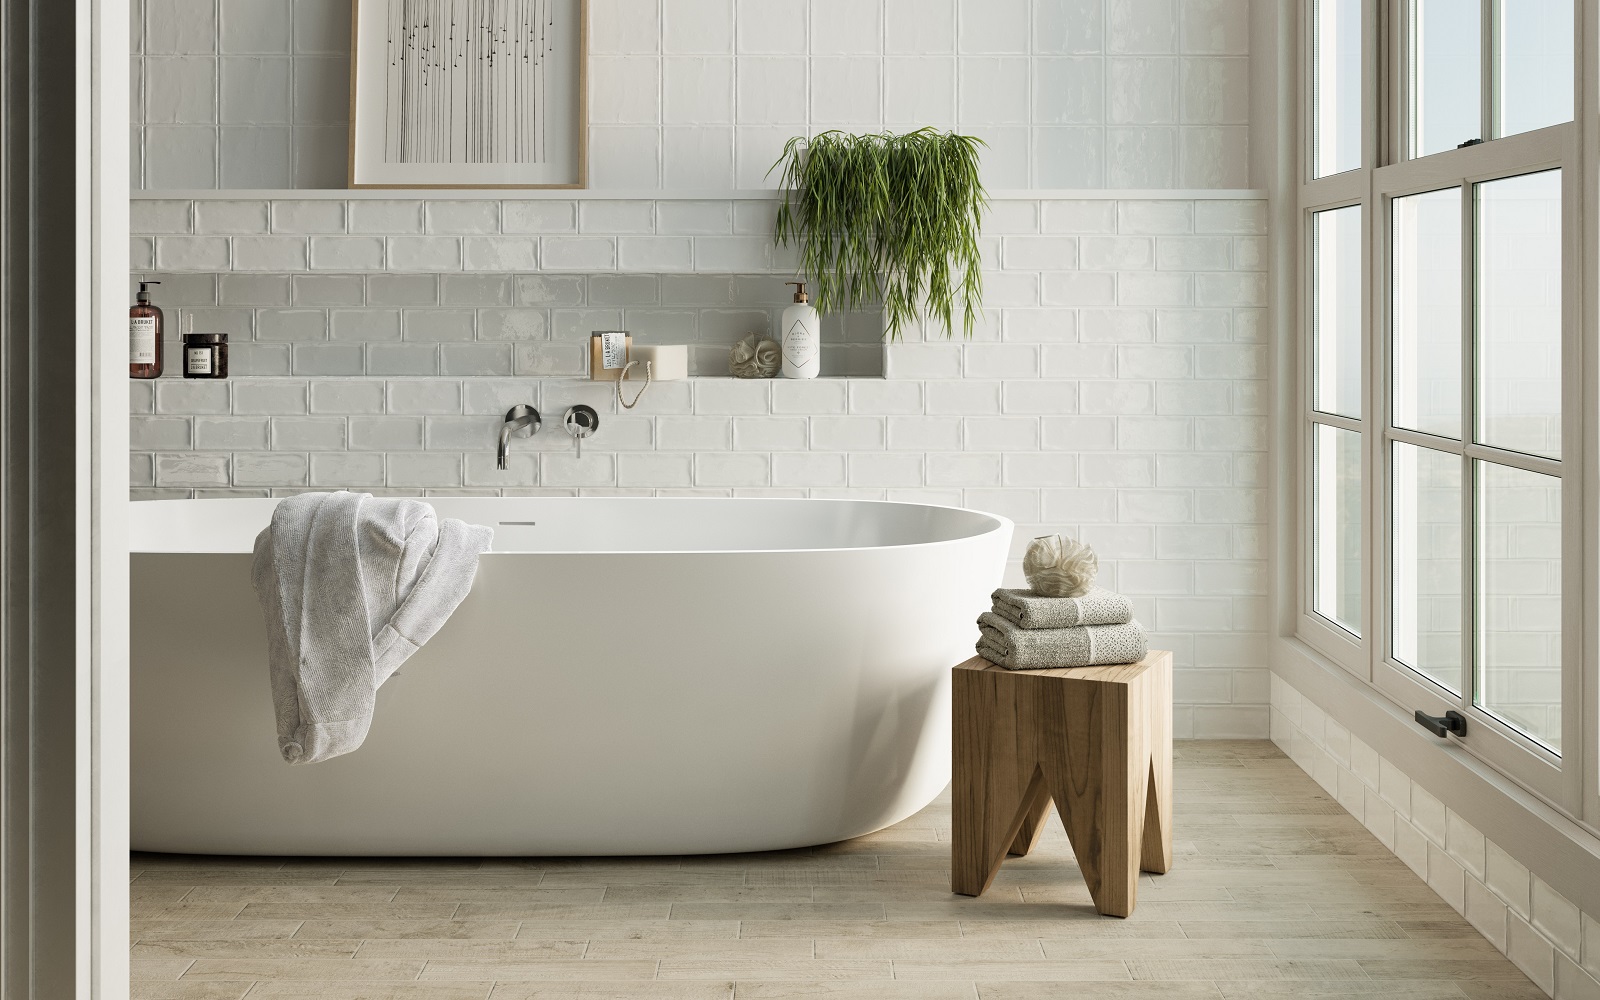 CTD Tiles white bathroom tiles with wooden stool and white freestanding bath